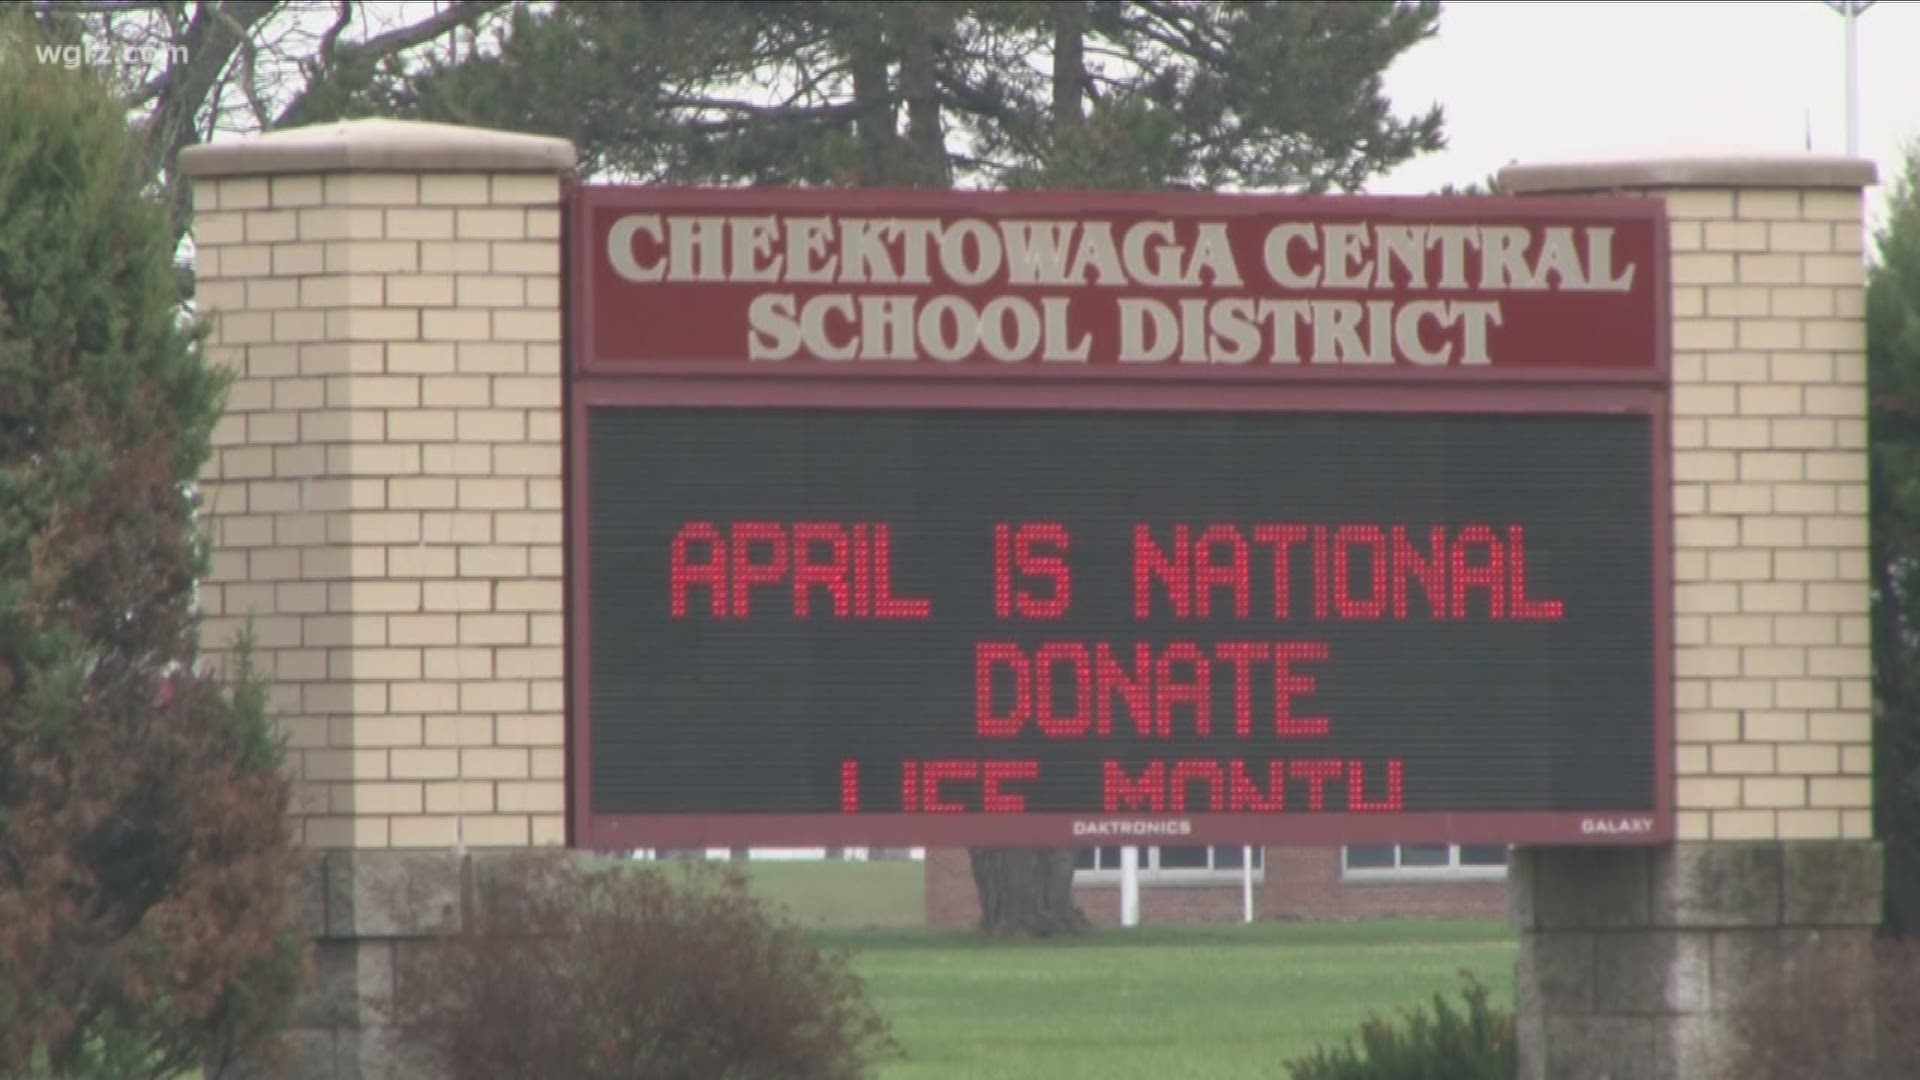 WE'RE KEEPING A CLOSE EYE ON THE CHEEKTOWAGA CENTRAL SCHOOL DISTRICT -- WHICH WANTS TO ELIMINATE TWO DOZEN JOBS INCLUDING TEACHERS,